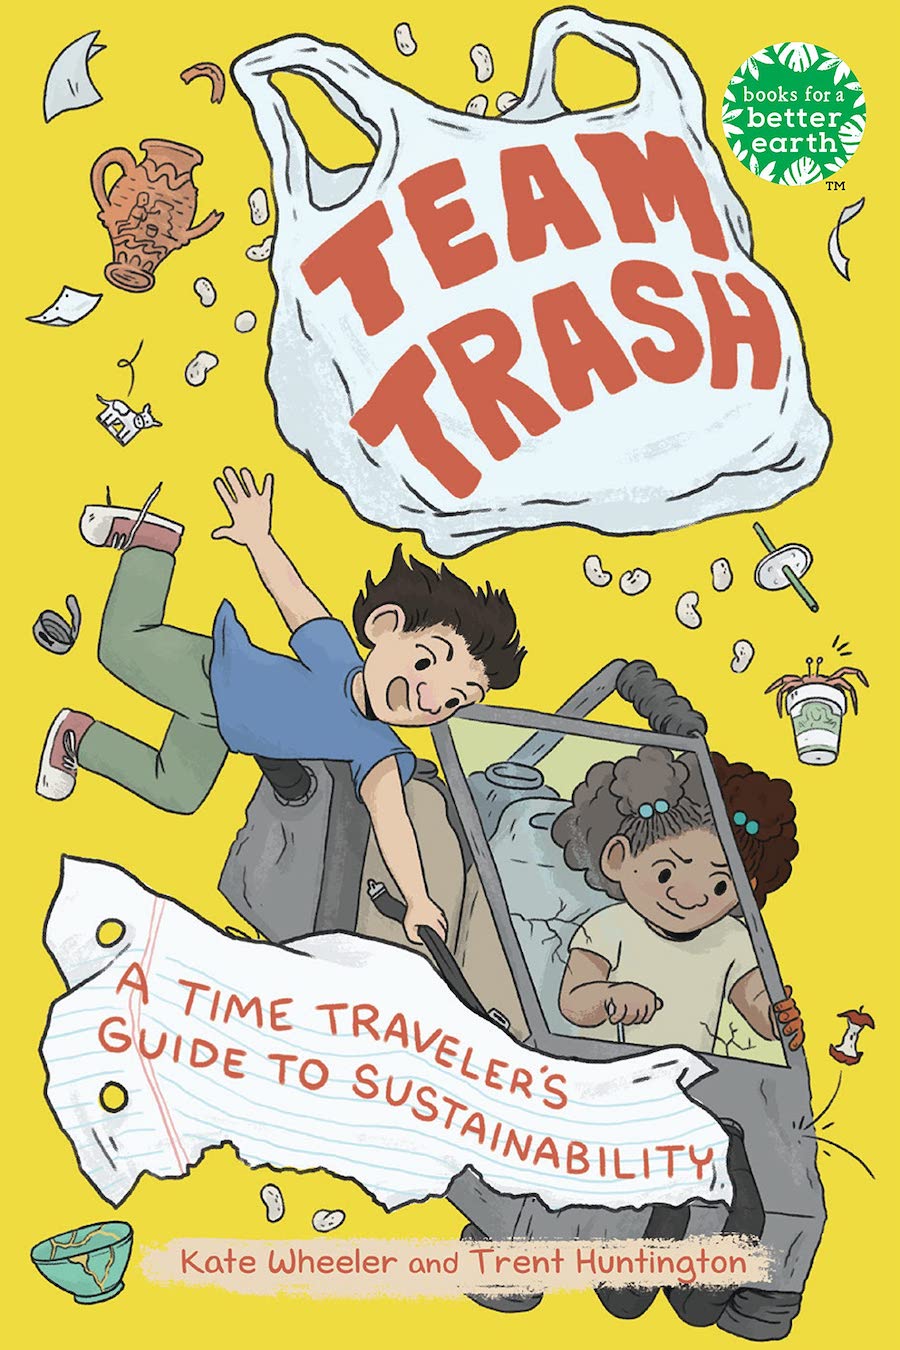 Cover of Team Trash, showing two childrenin a homemade go-cart surrounded by bits of litter flying through the air.